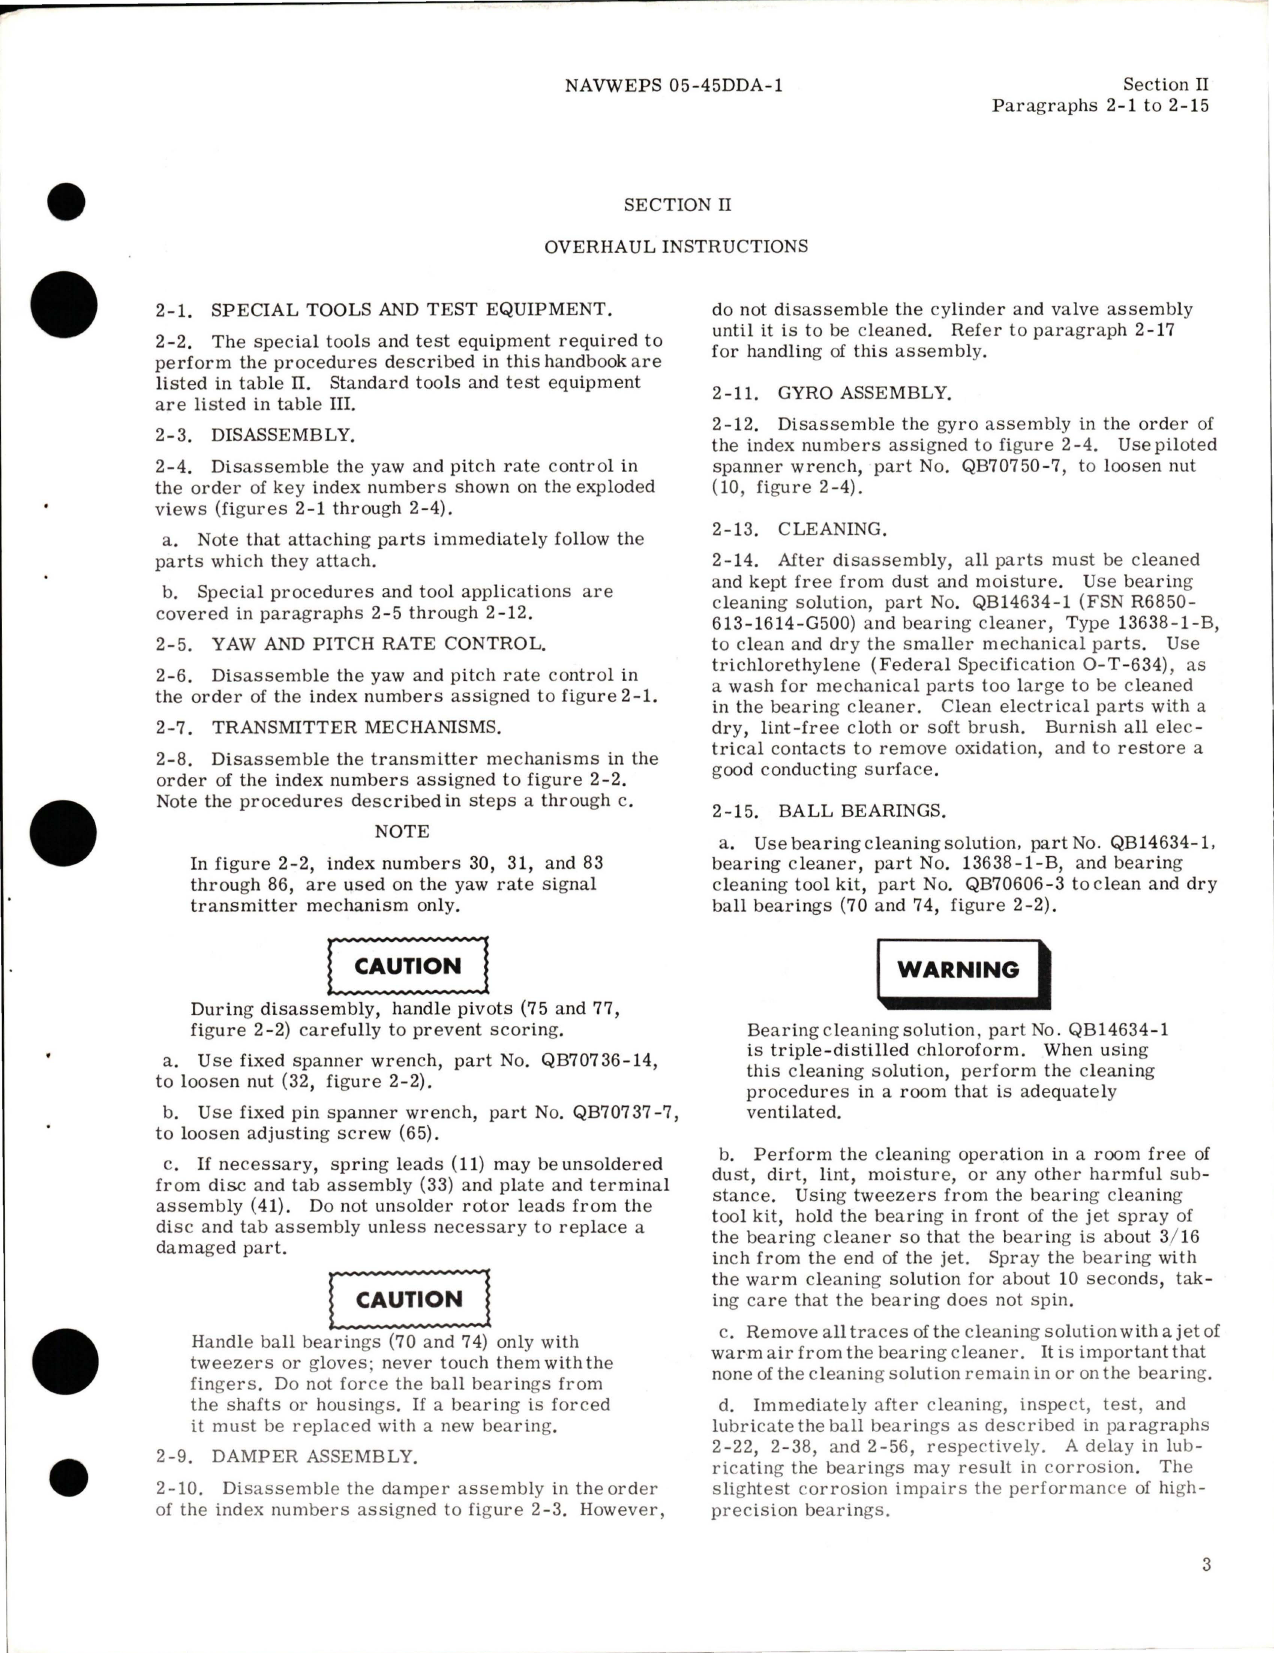 Sample page 5 from AirCorps Library document: Overhaul Instructions for Yaw and Pitch Rate Control - Type 15839-1B